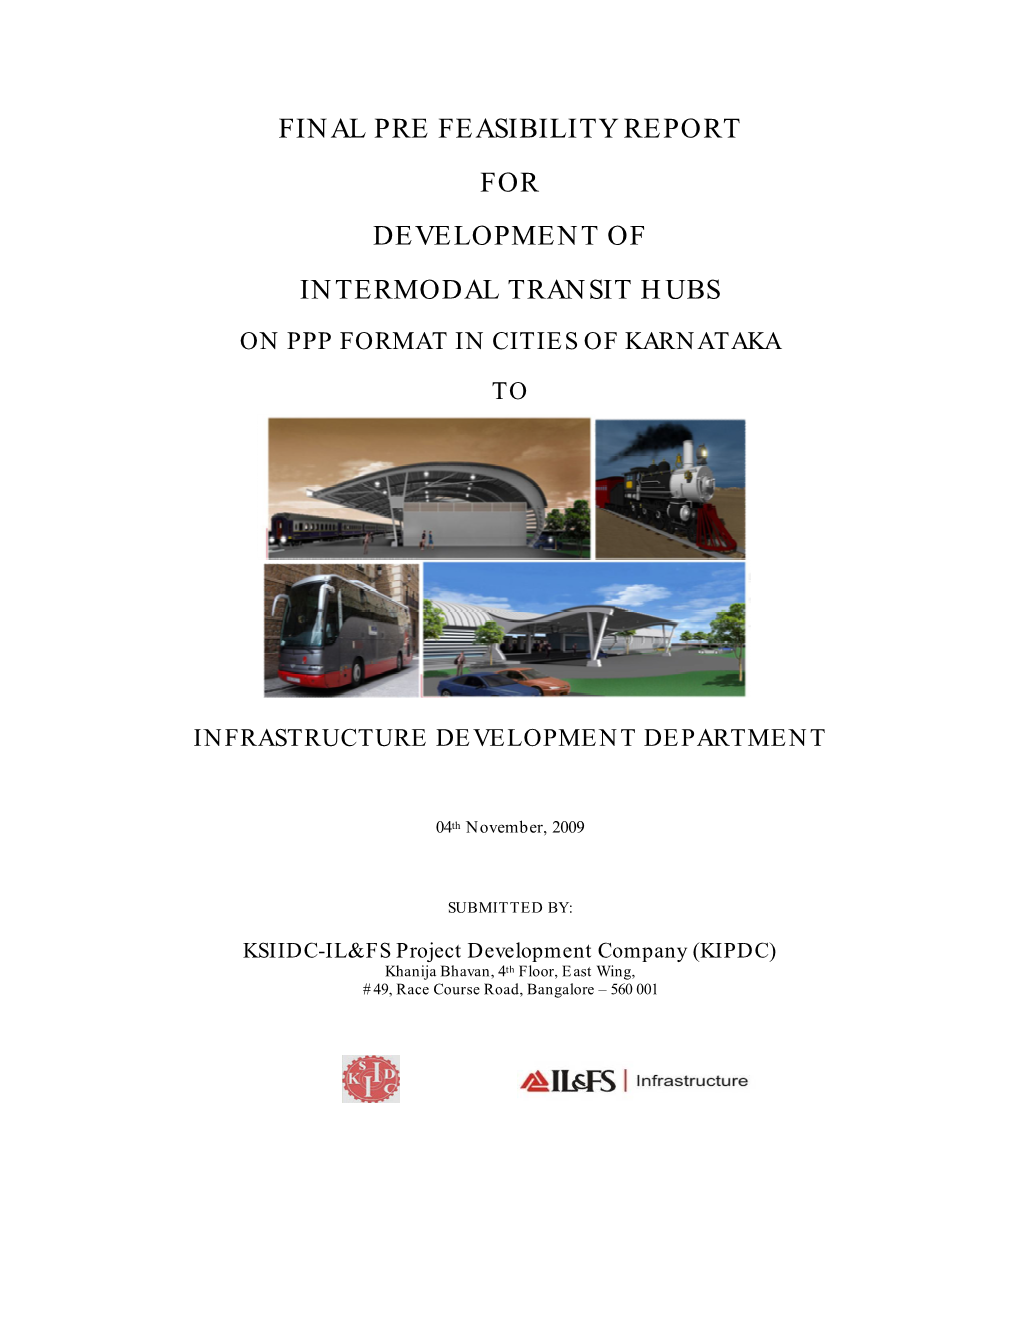 Final Pre Feasibility Report for Development of Intermodal Transit Hubs on Ppp Format in Cities of Karnataka To